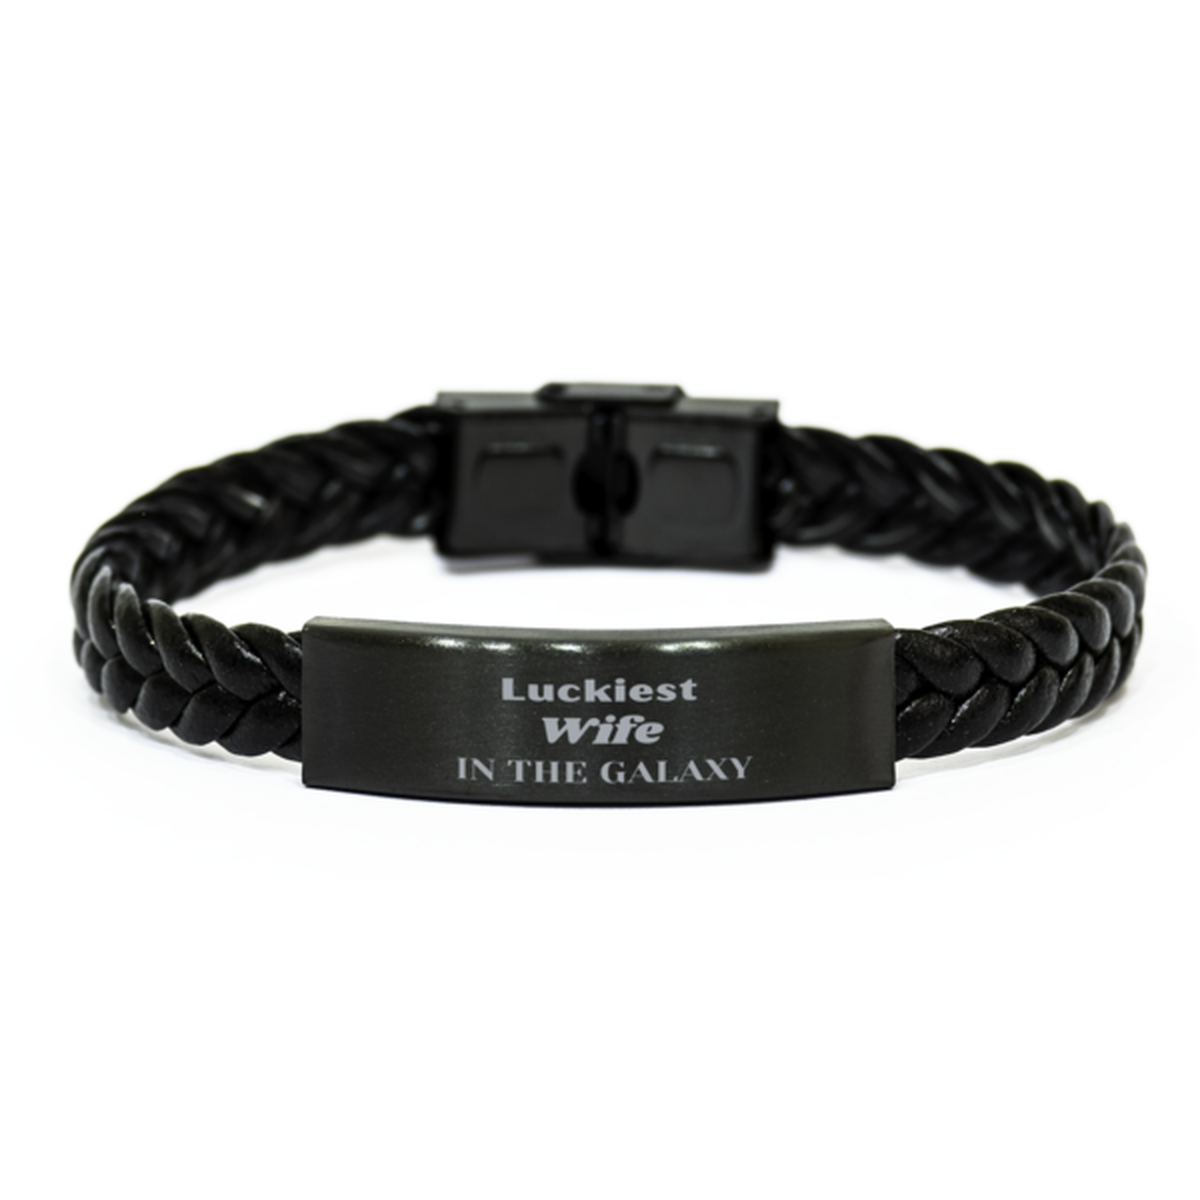 Luckiest Wife in the Galaxy, To My Wife Engraved Gifts, Christmas Wife Braided Leather Bracelet Gifts, X-mas Birthday Unique Gifts For Wife Men Women